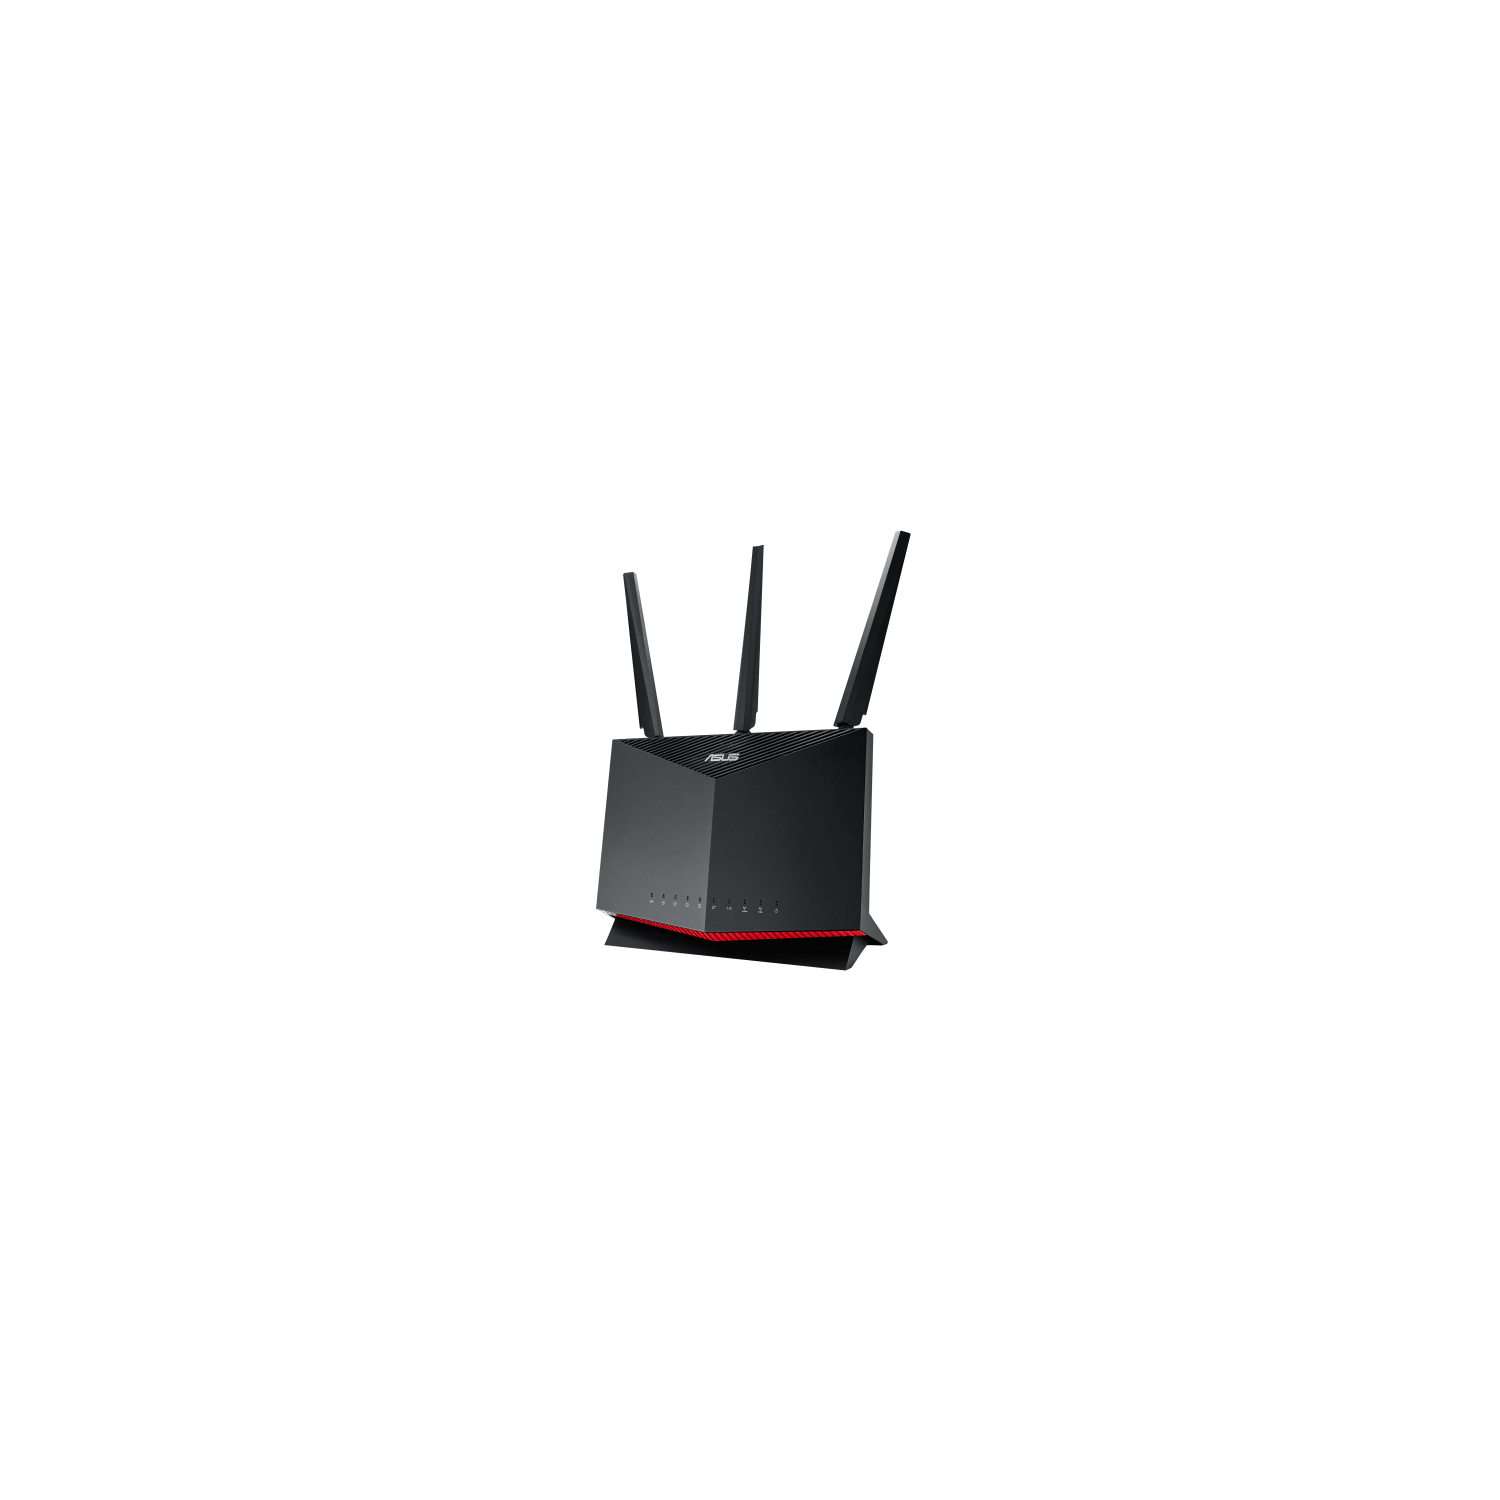 Asus AX5700 5700Mbps Wi-Fi 6 Ethernet Ultrafast Speed Dual Band Black Wireless Router (RT-AX86U)